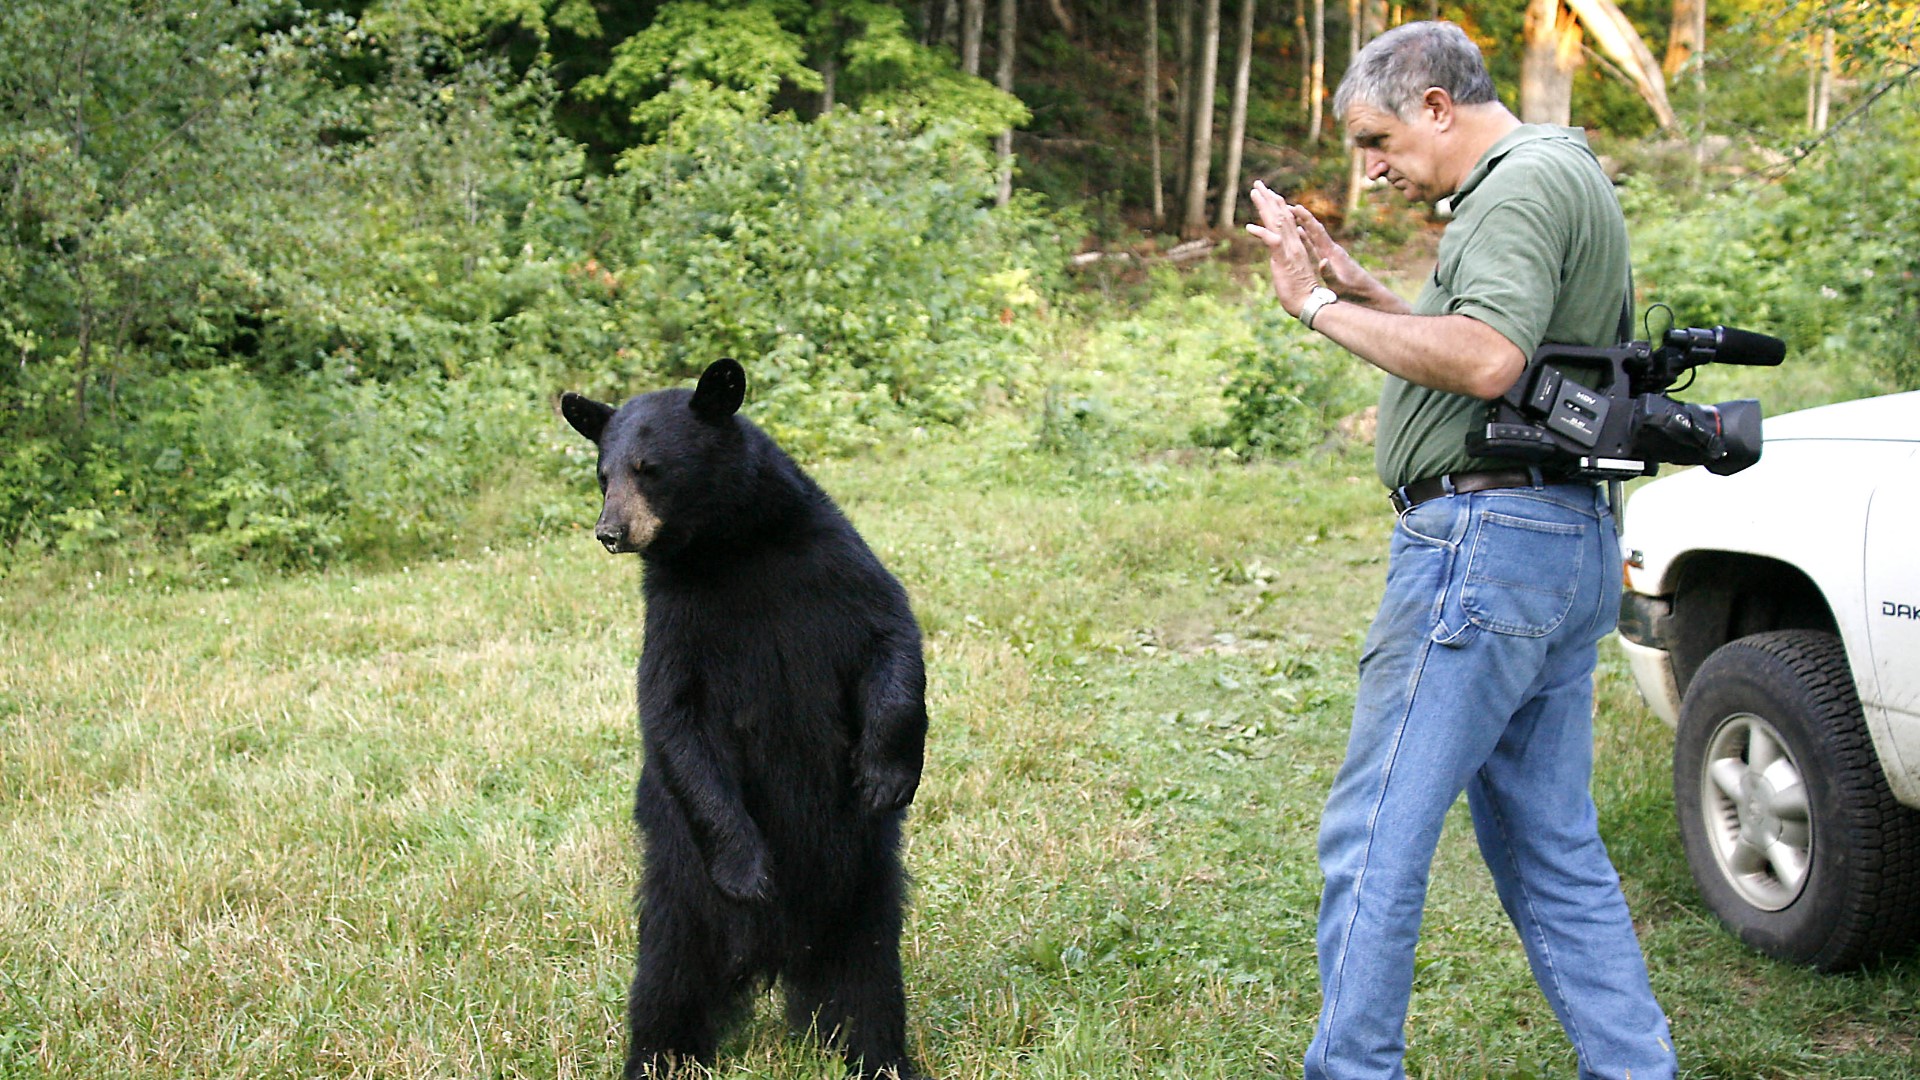 Ben Kilham has spent decades researching bear intelligence and rehabilitating orphaned black bears in N.H. When cubs are ready, it takes a team to set them free.